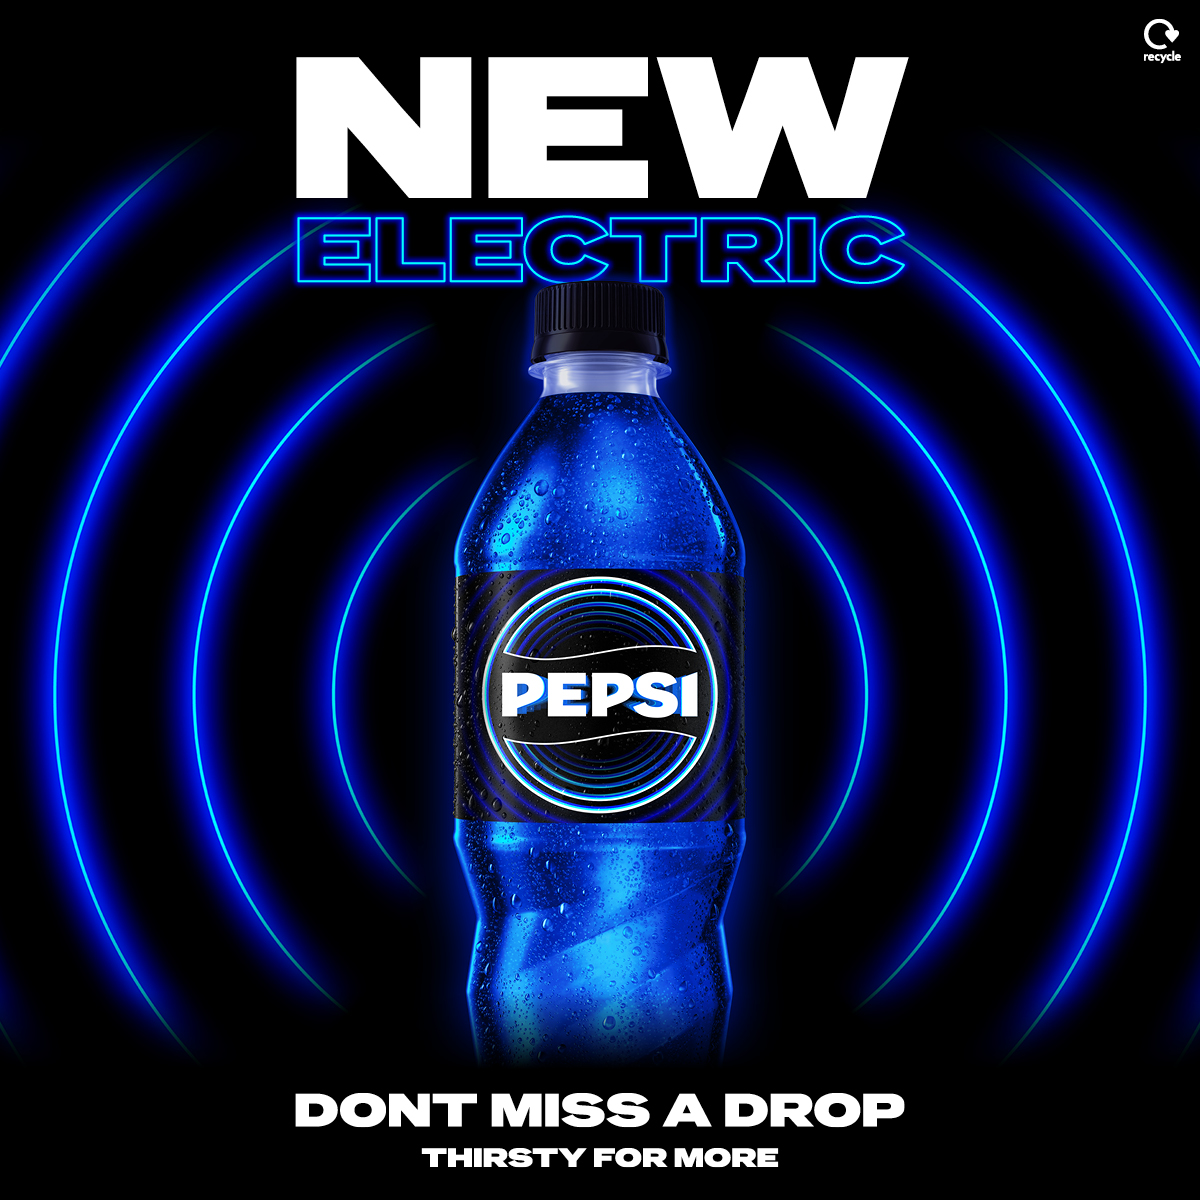 Introducing Pepsi's brand NEW innovating flavour, Pepsi Electric! 🥤 Coming to One Stop soon... Find your local store 👉 onestop.co.uk/store-finder/ Subject to availability. Participating stores only. #Pepsi #PepsiElectric